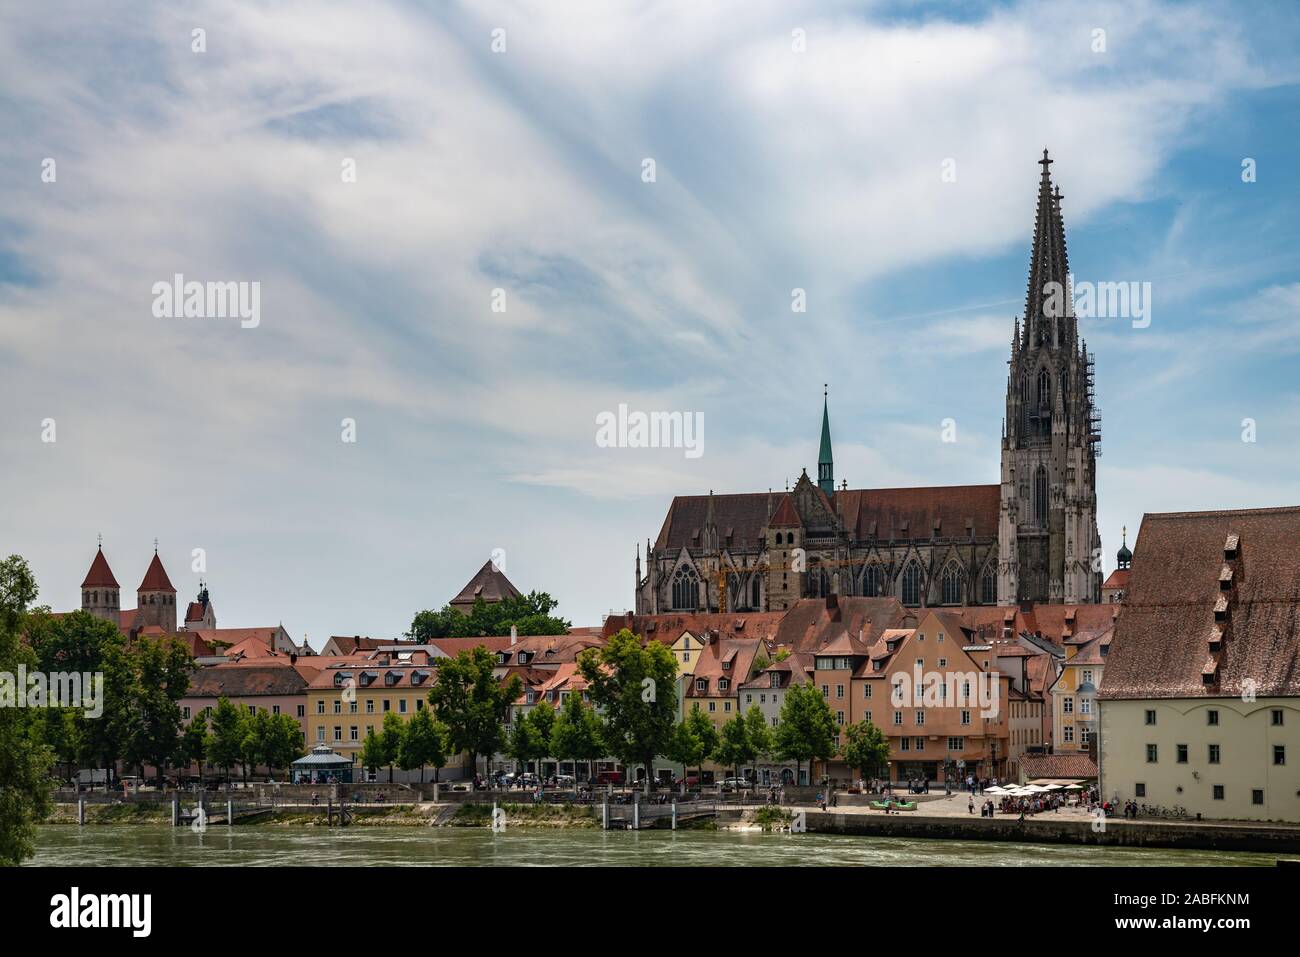 Beautiful view of the Regensburg Cathedral ( St. Peter's Cathedral) on river side of Danube, in Regensburg (Ratisbon), Bavaria, Germany Stock Photo